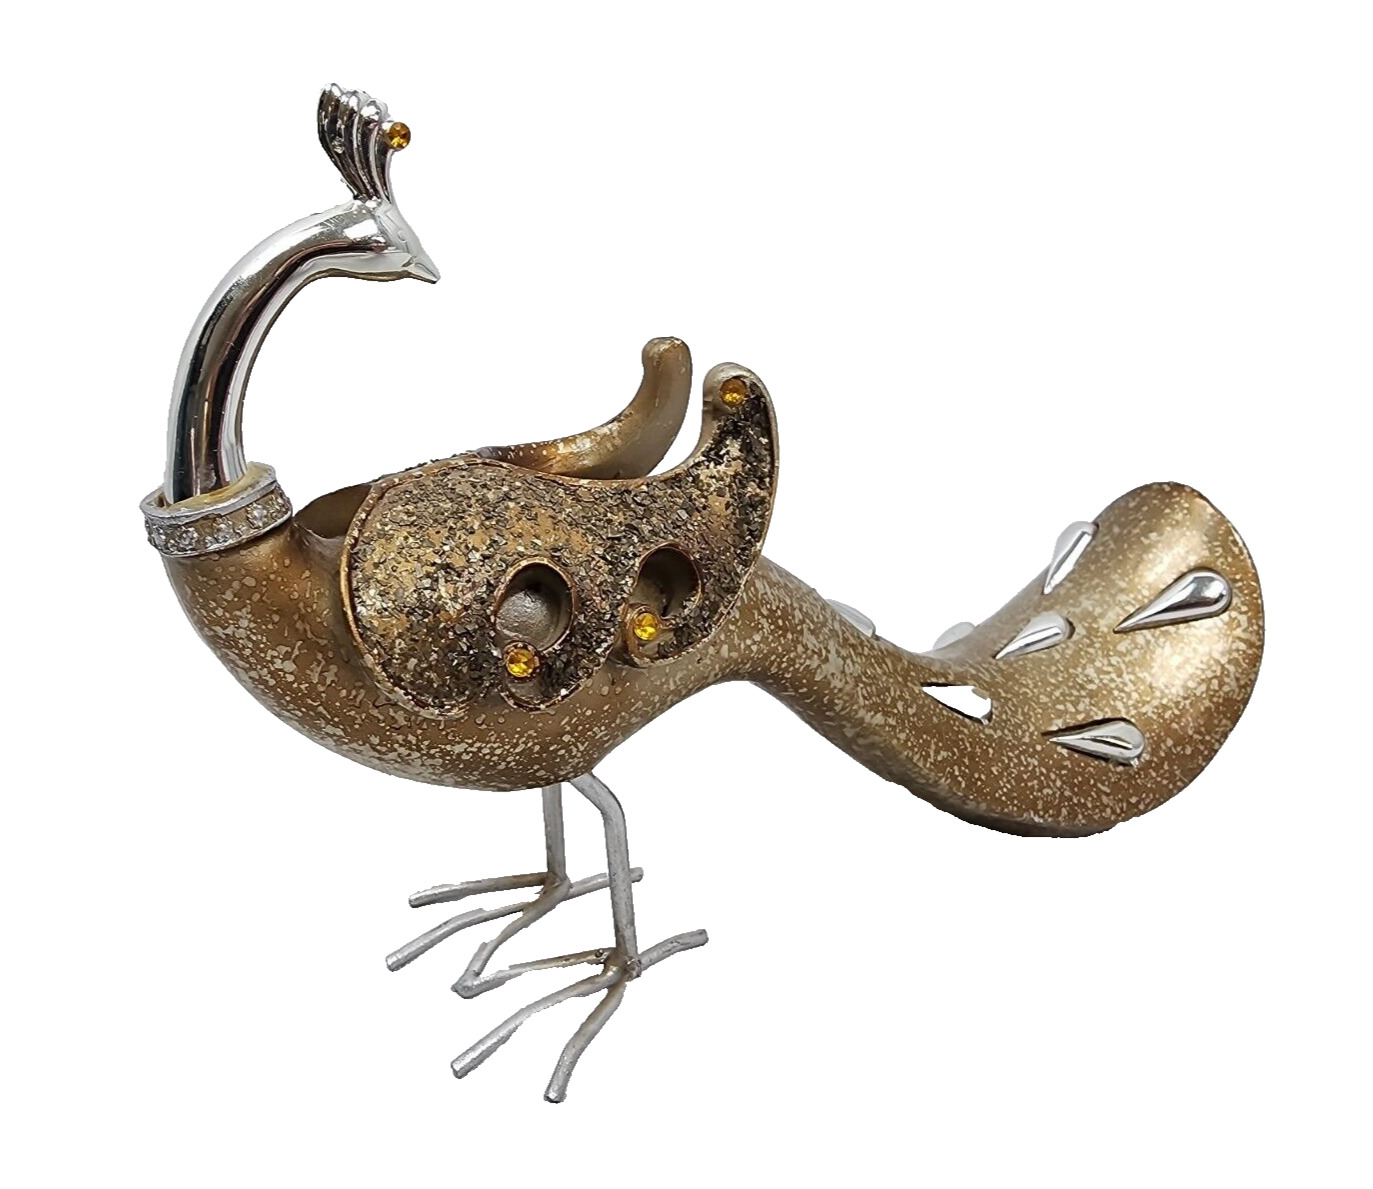  Peacock Figurine With Gold & Silver Accent Ceramic 8